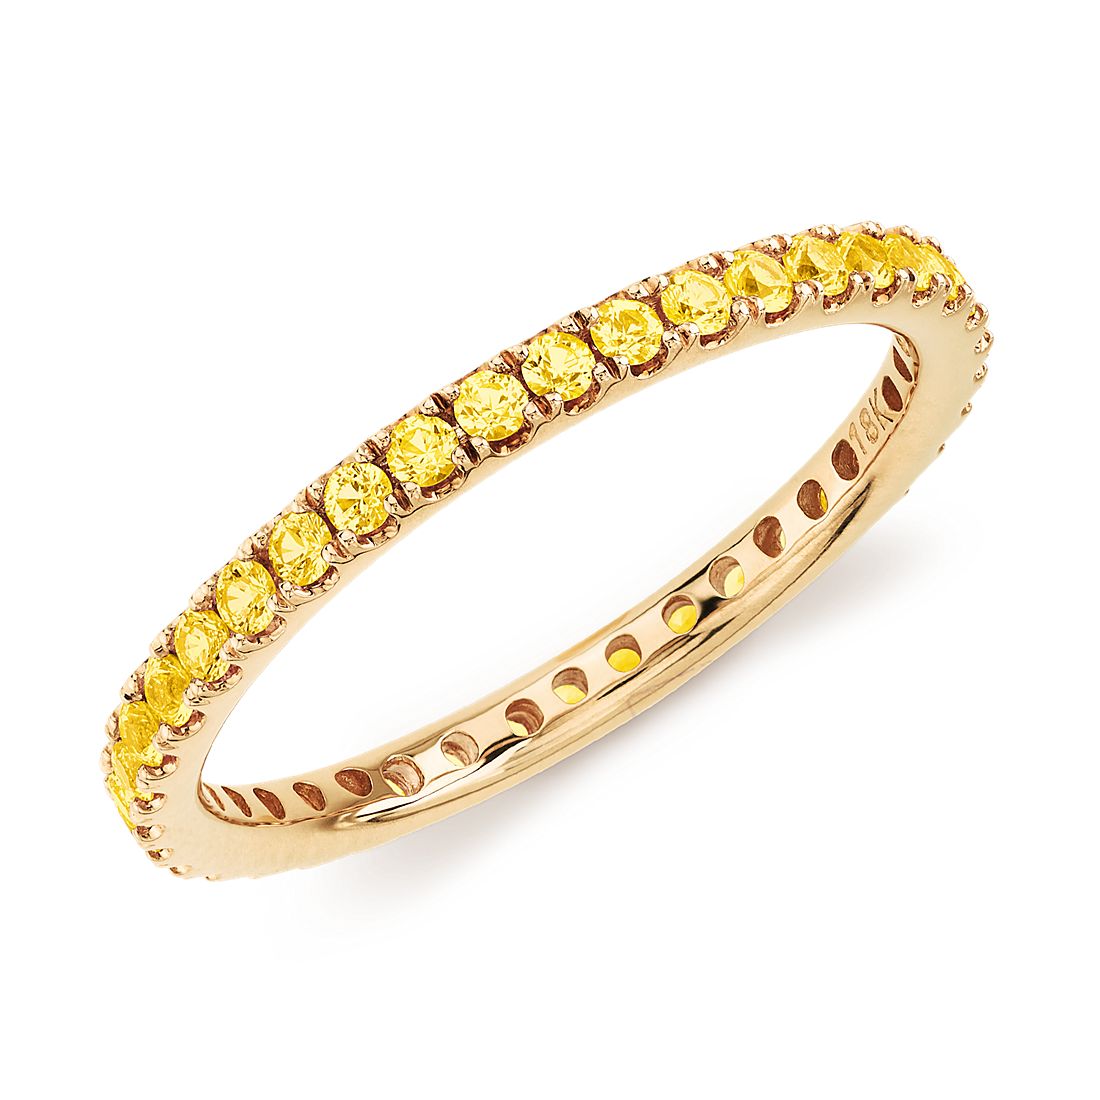 Yellow Sapphire Eternity Ring in 18k Yellow Gold